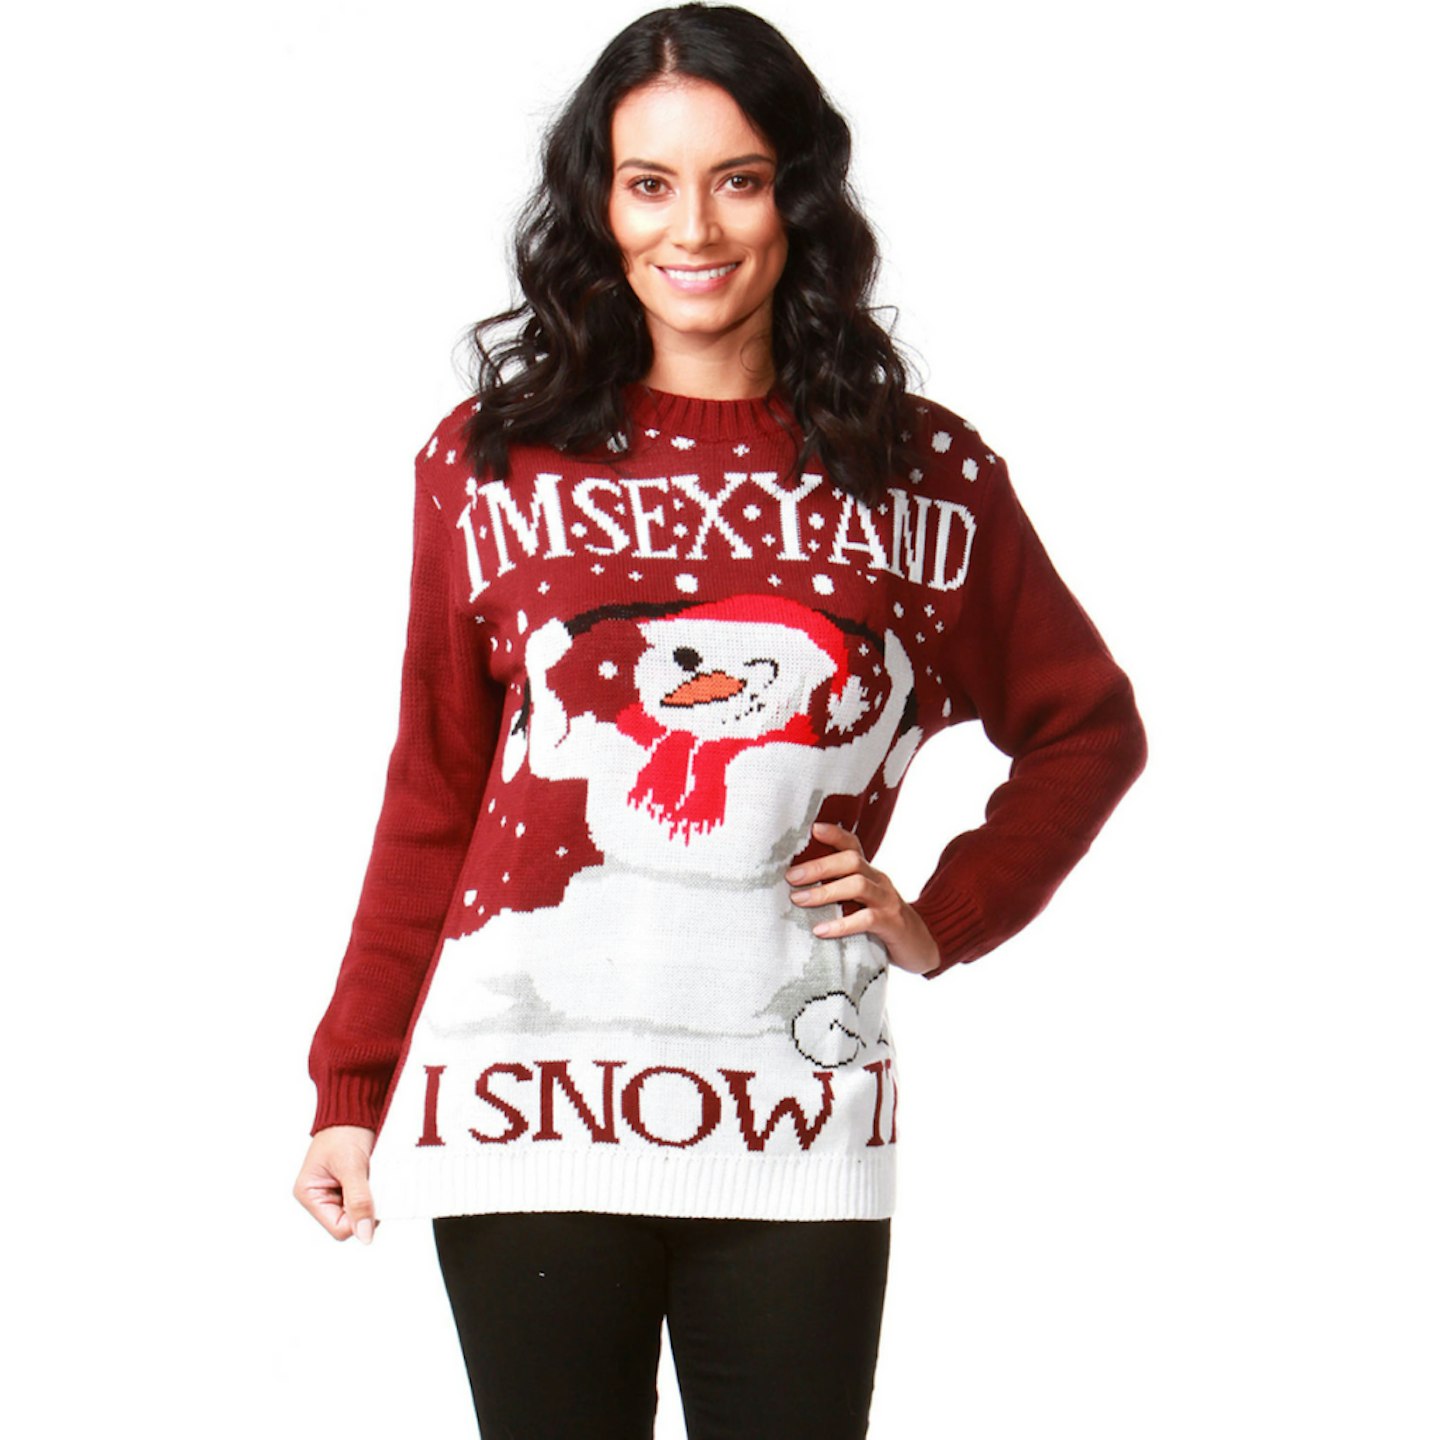 Red/White Christmas Jumper With 'I'm Sexy & I Snow It' Slogan